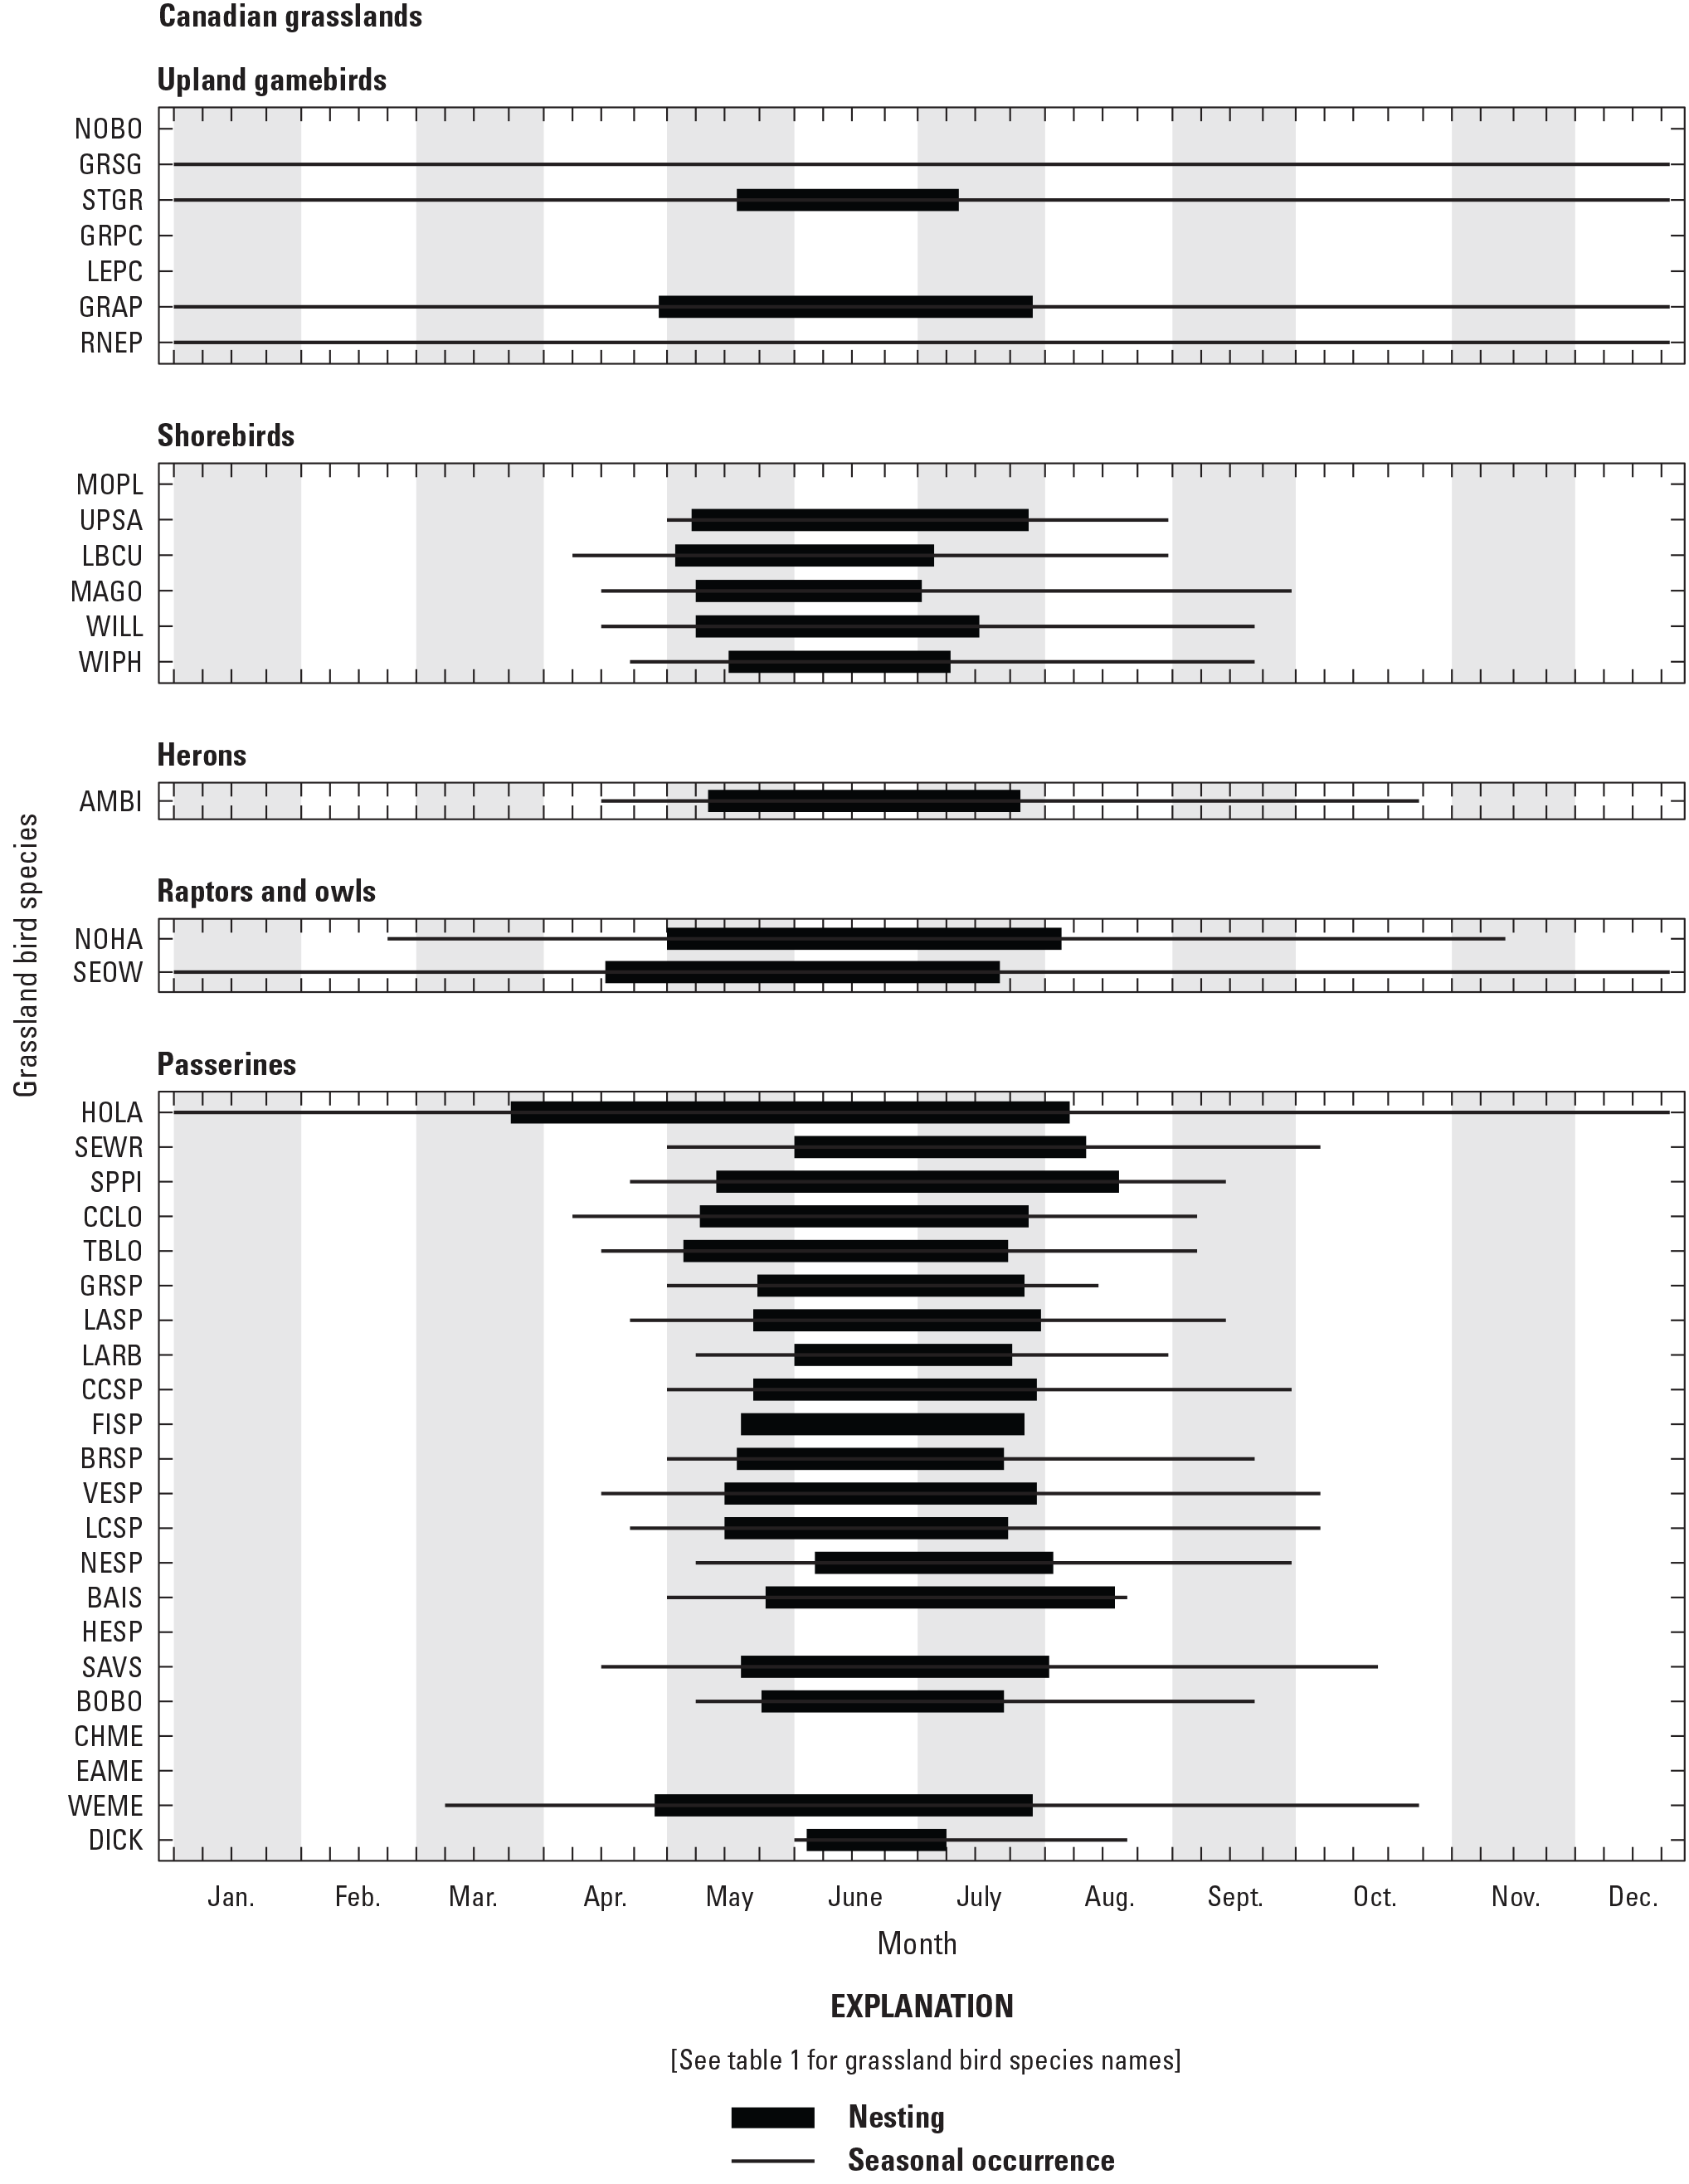 Figure showing seasonal occurrence and nesting phenology for 38 grassland bird species
                     in the Canadian grasslands.